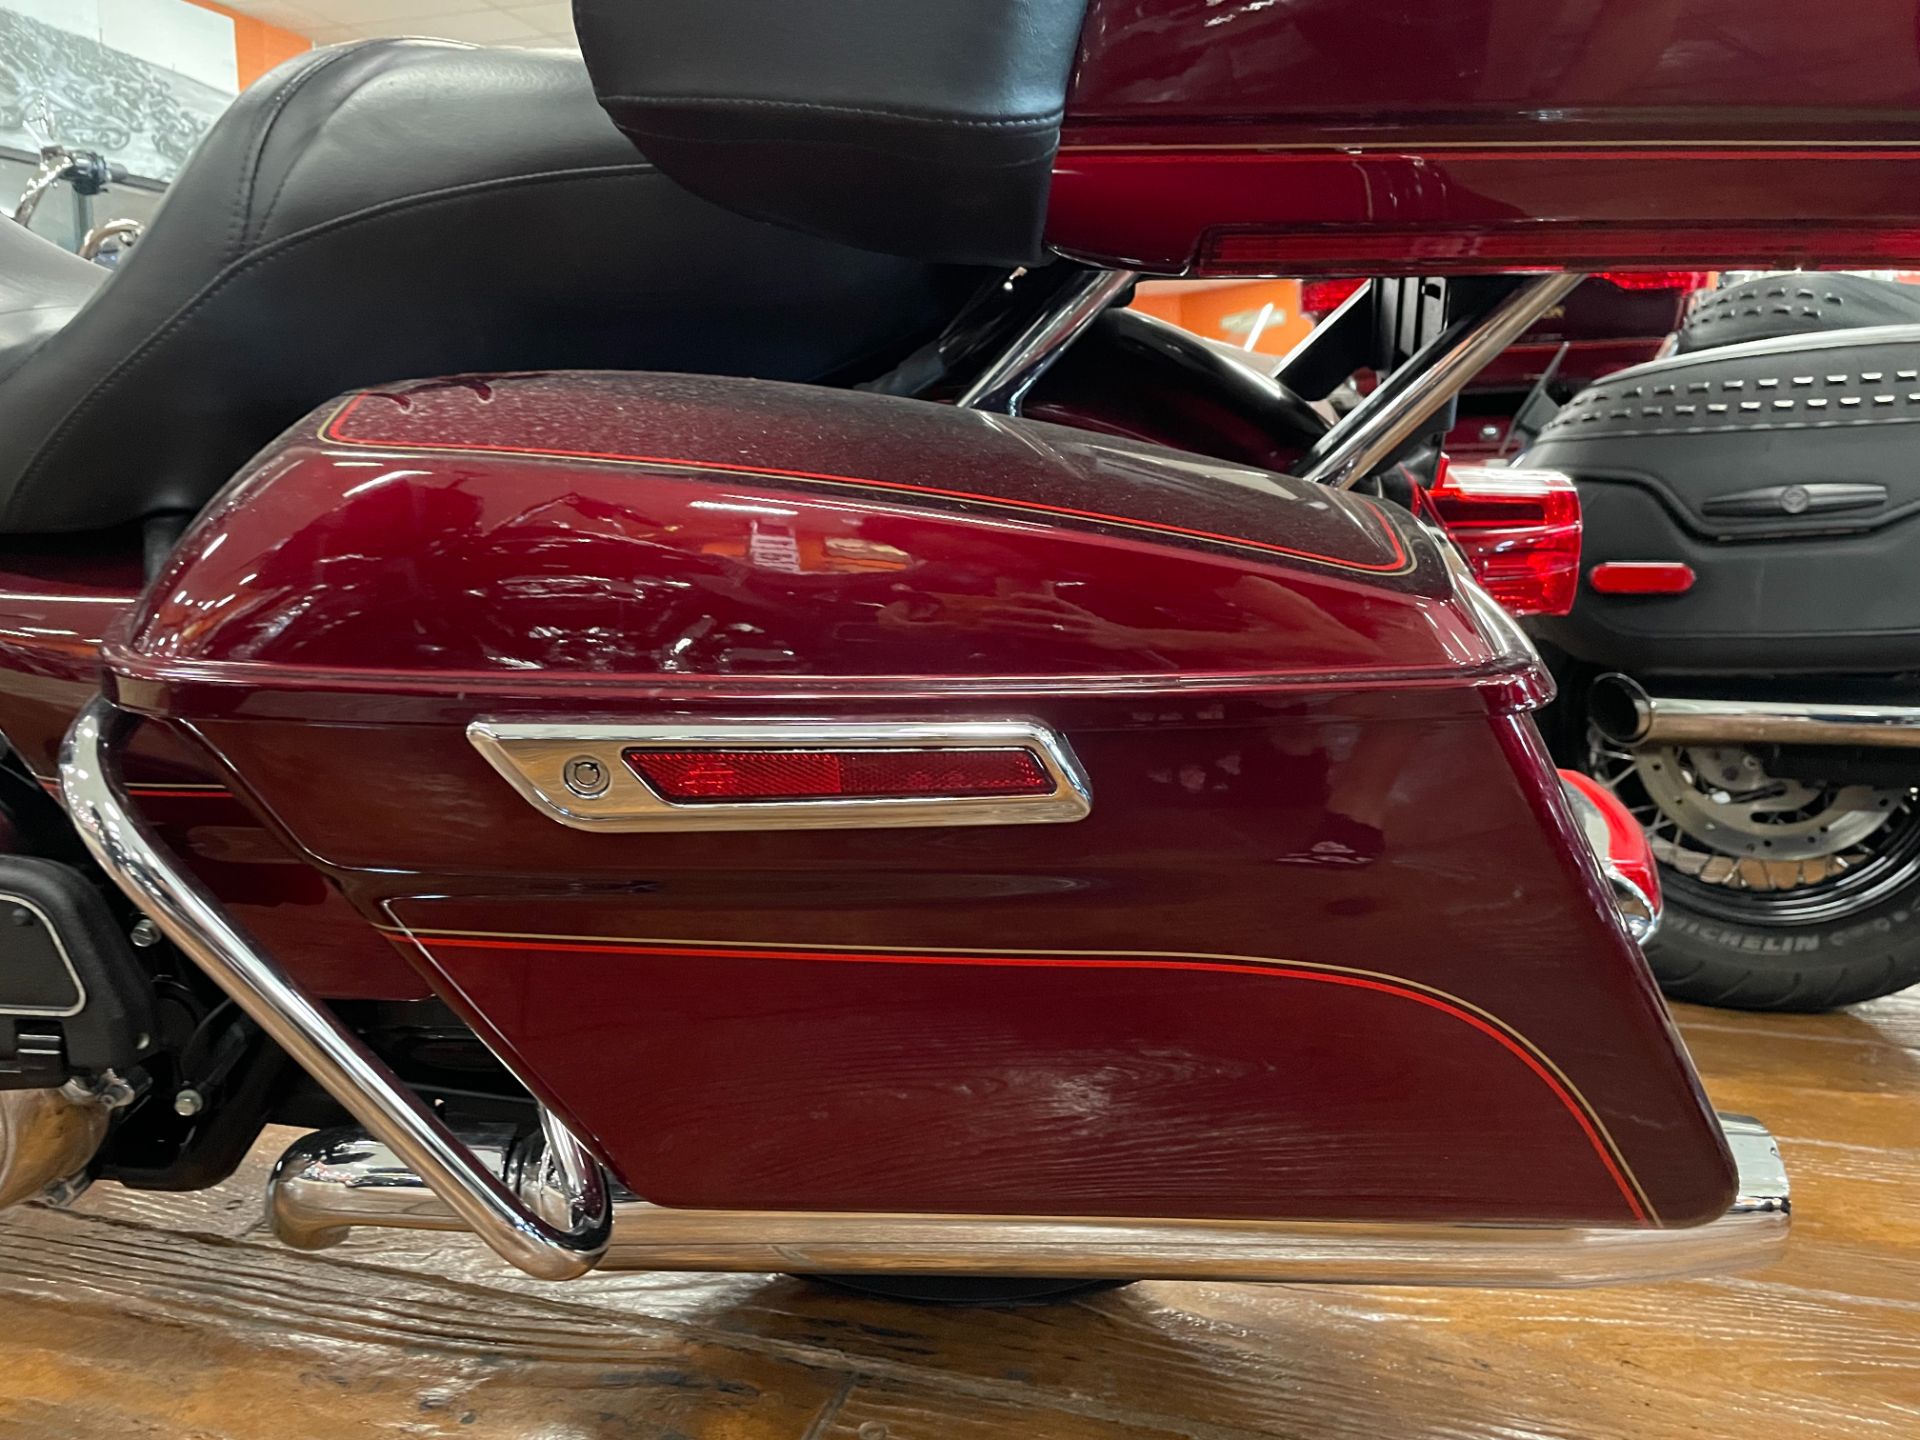 2016 Harley-Davidson Ultra Classic Electra Glide in Marion, Illinois - Photo 18